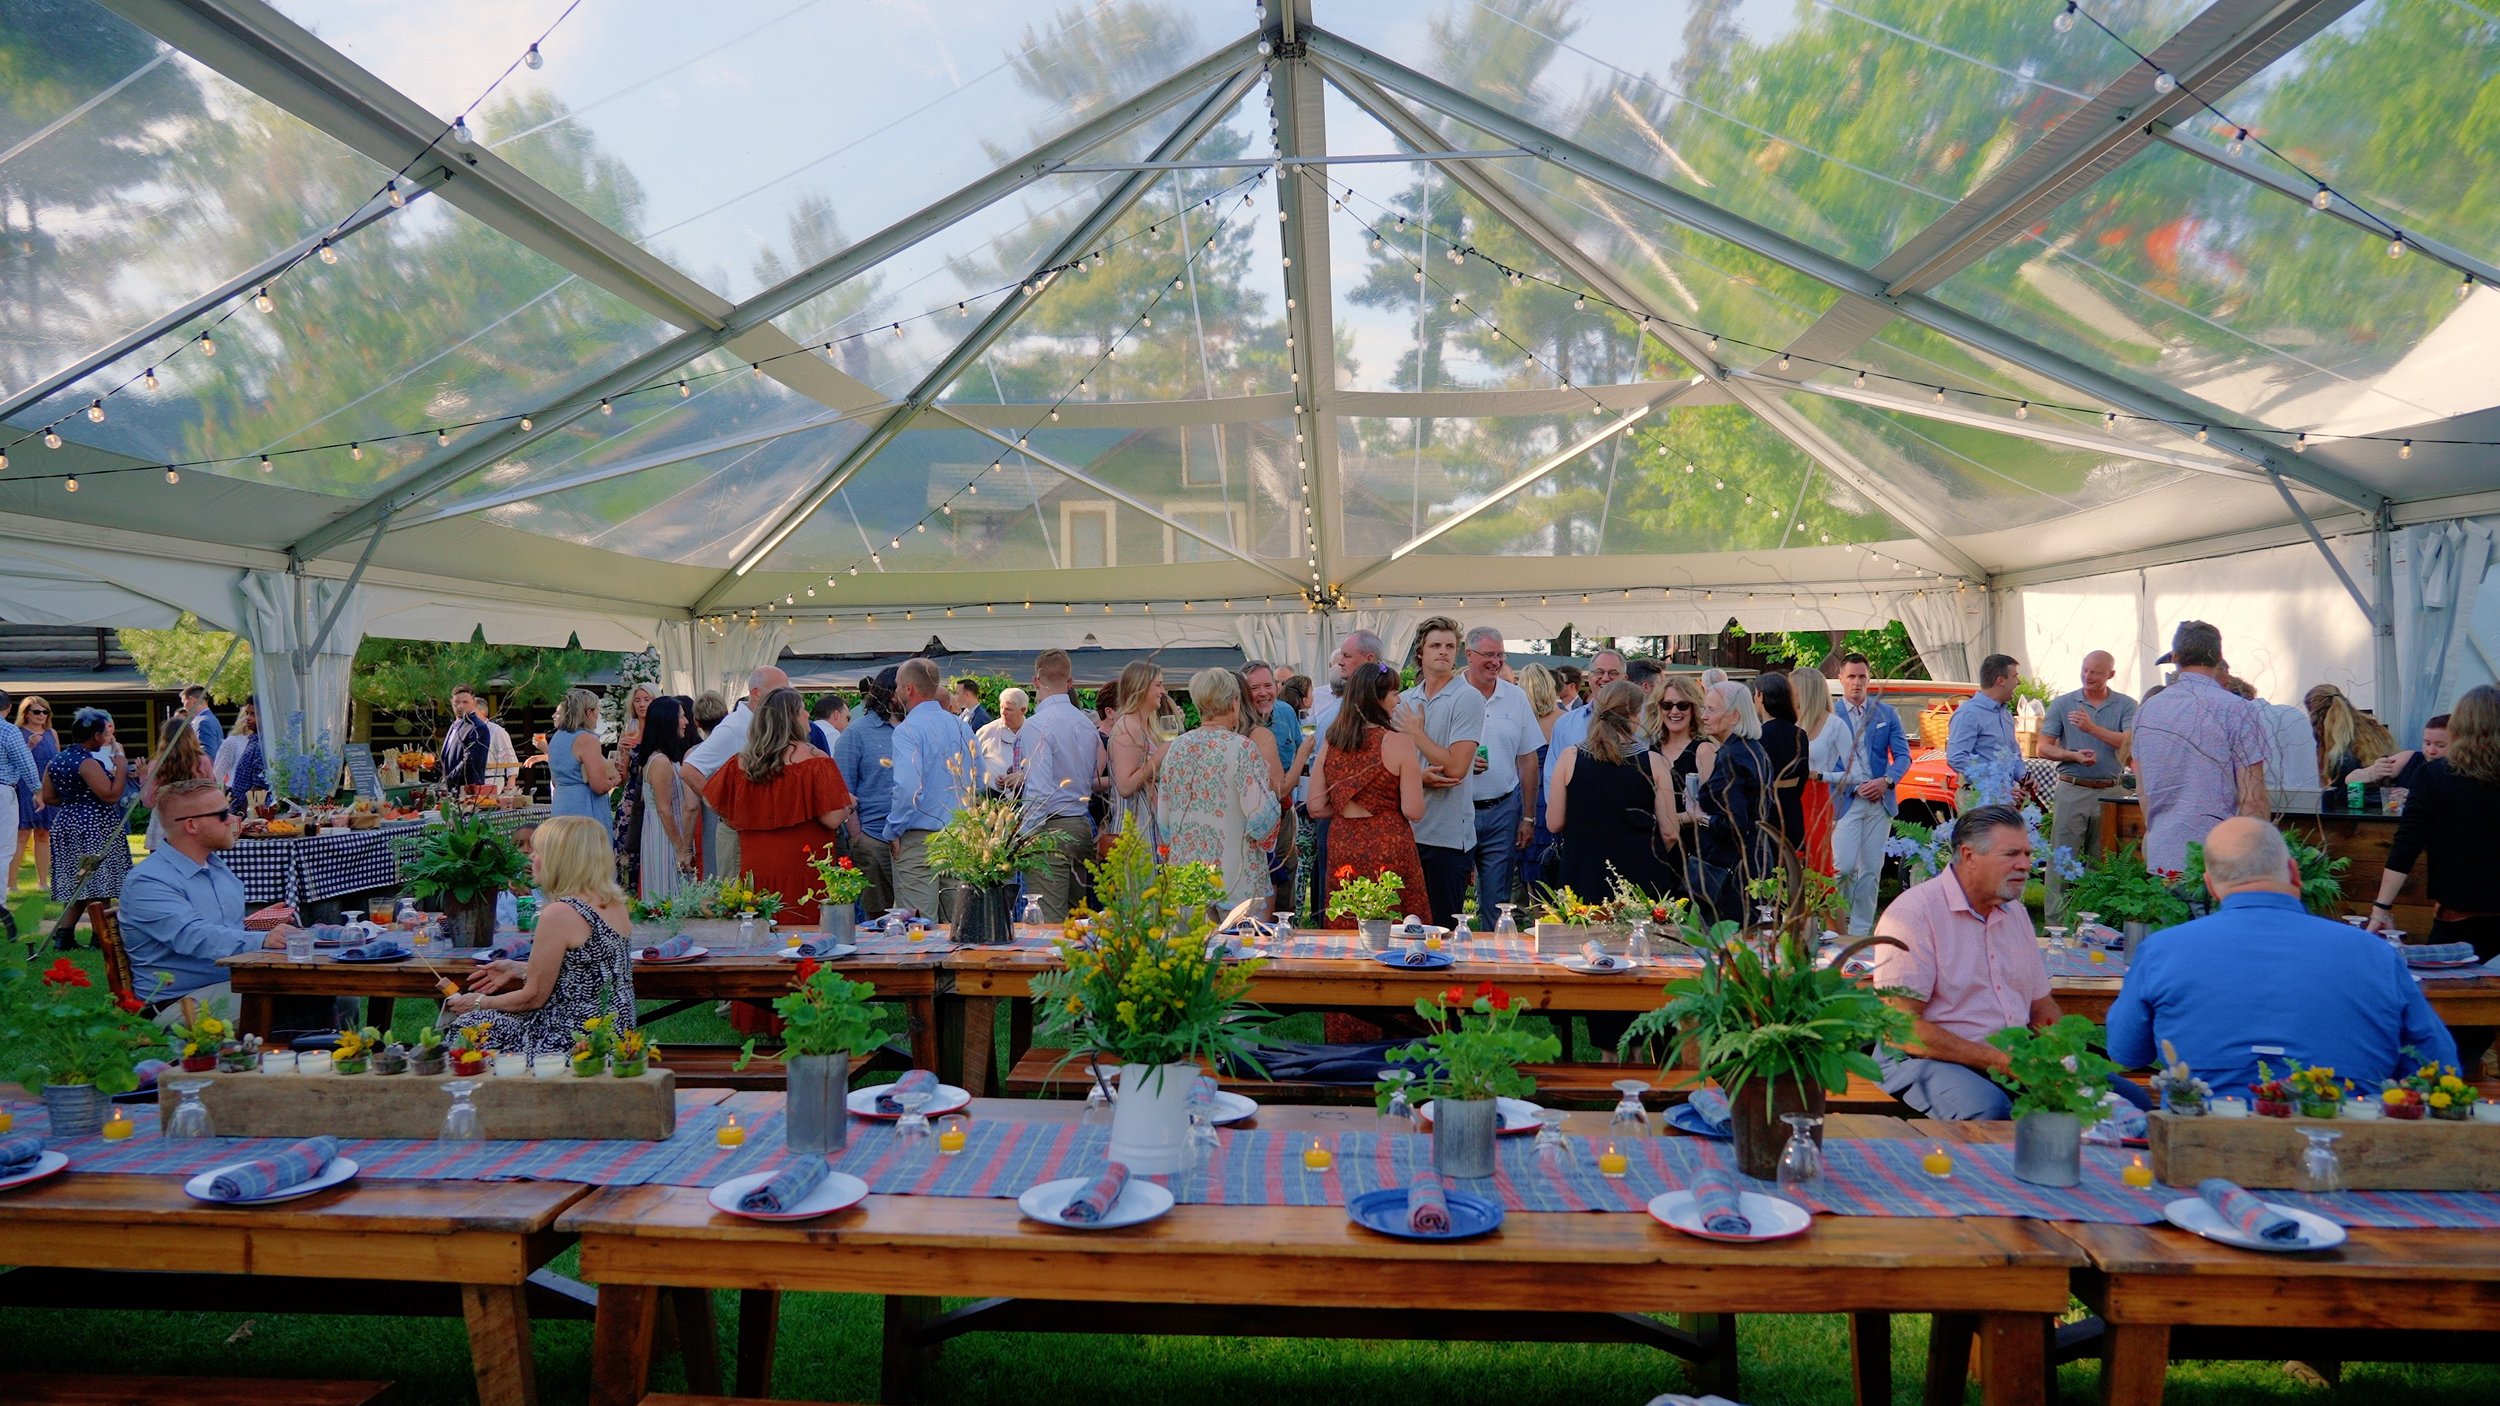 Guests at anOutdoor rehearsal dinner under a glass tent